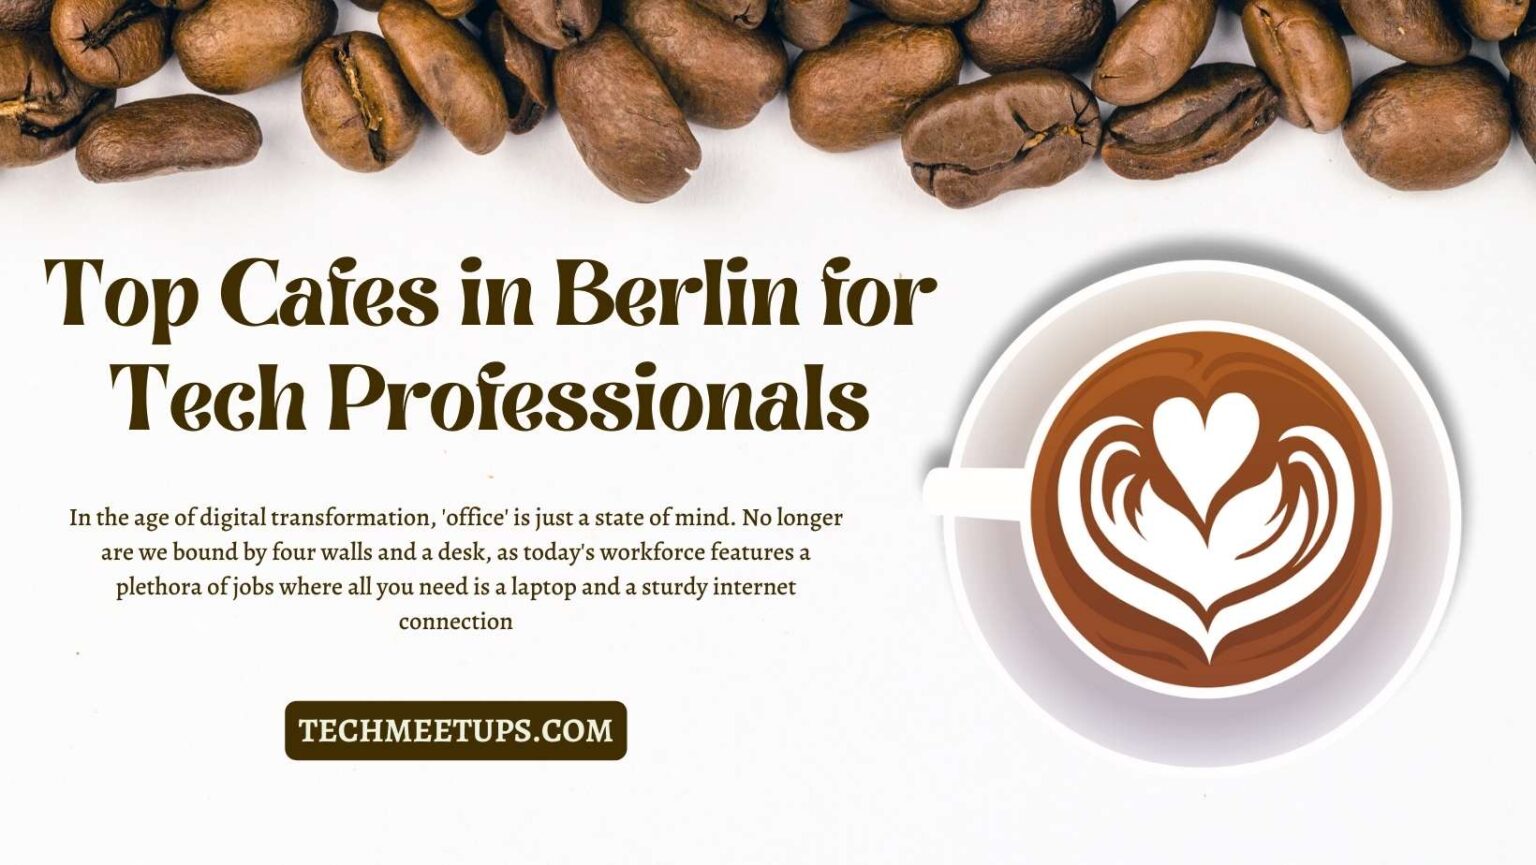 Where Tech Meets Coffee: Top Cafes in Berlin for Tech Professionals